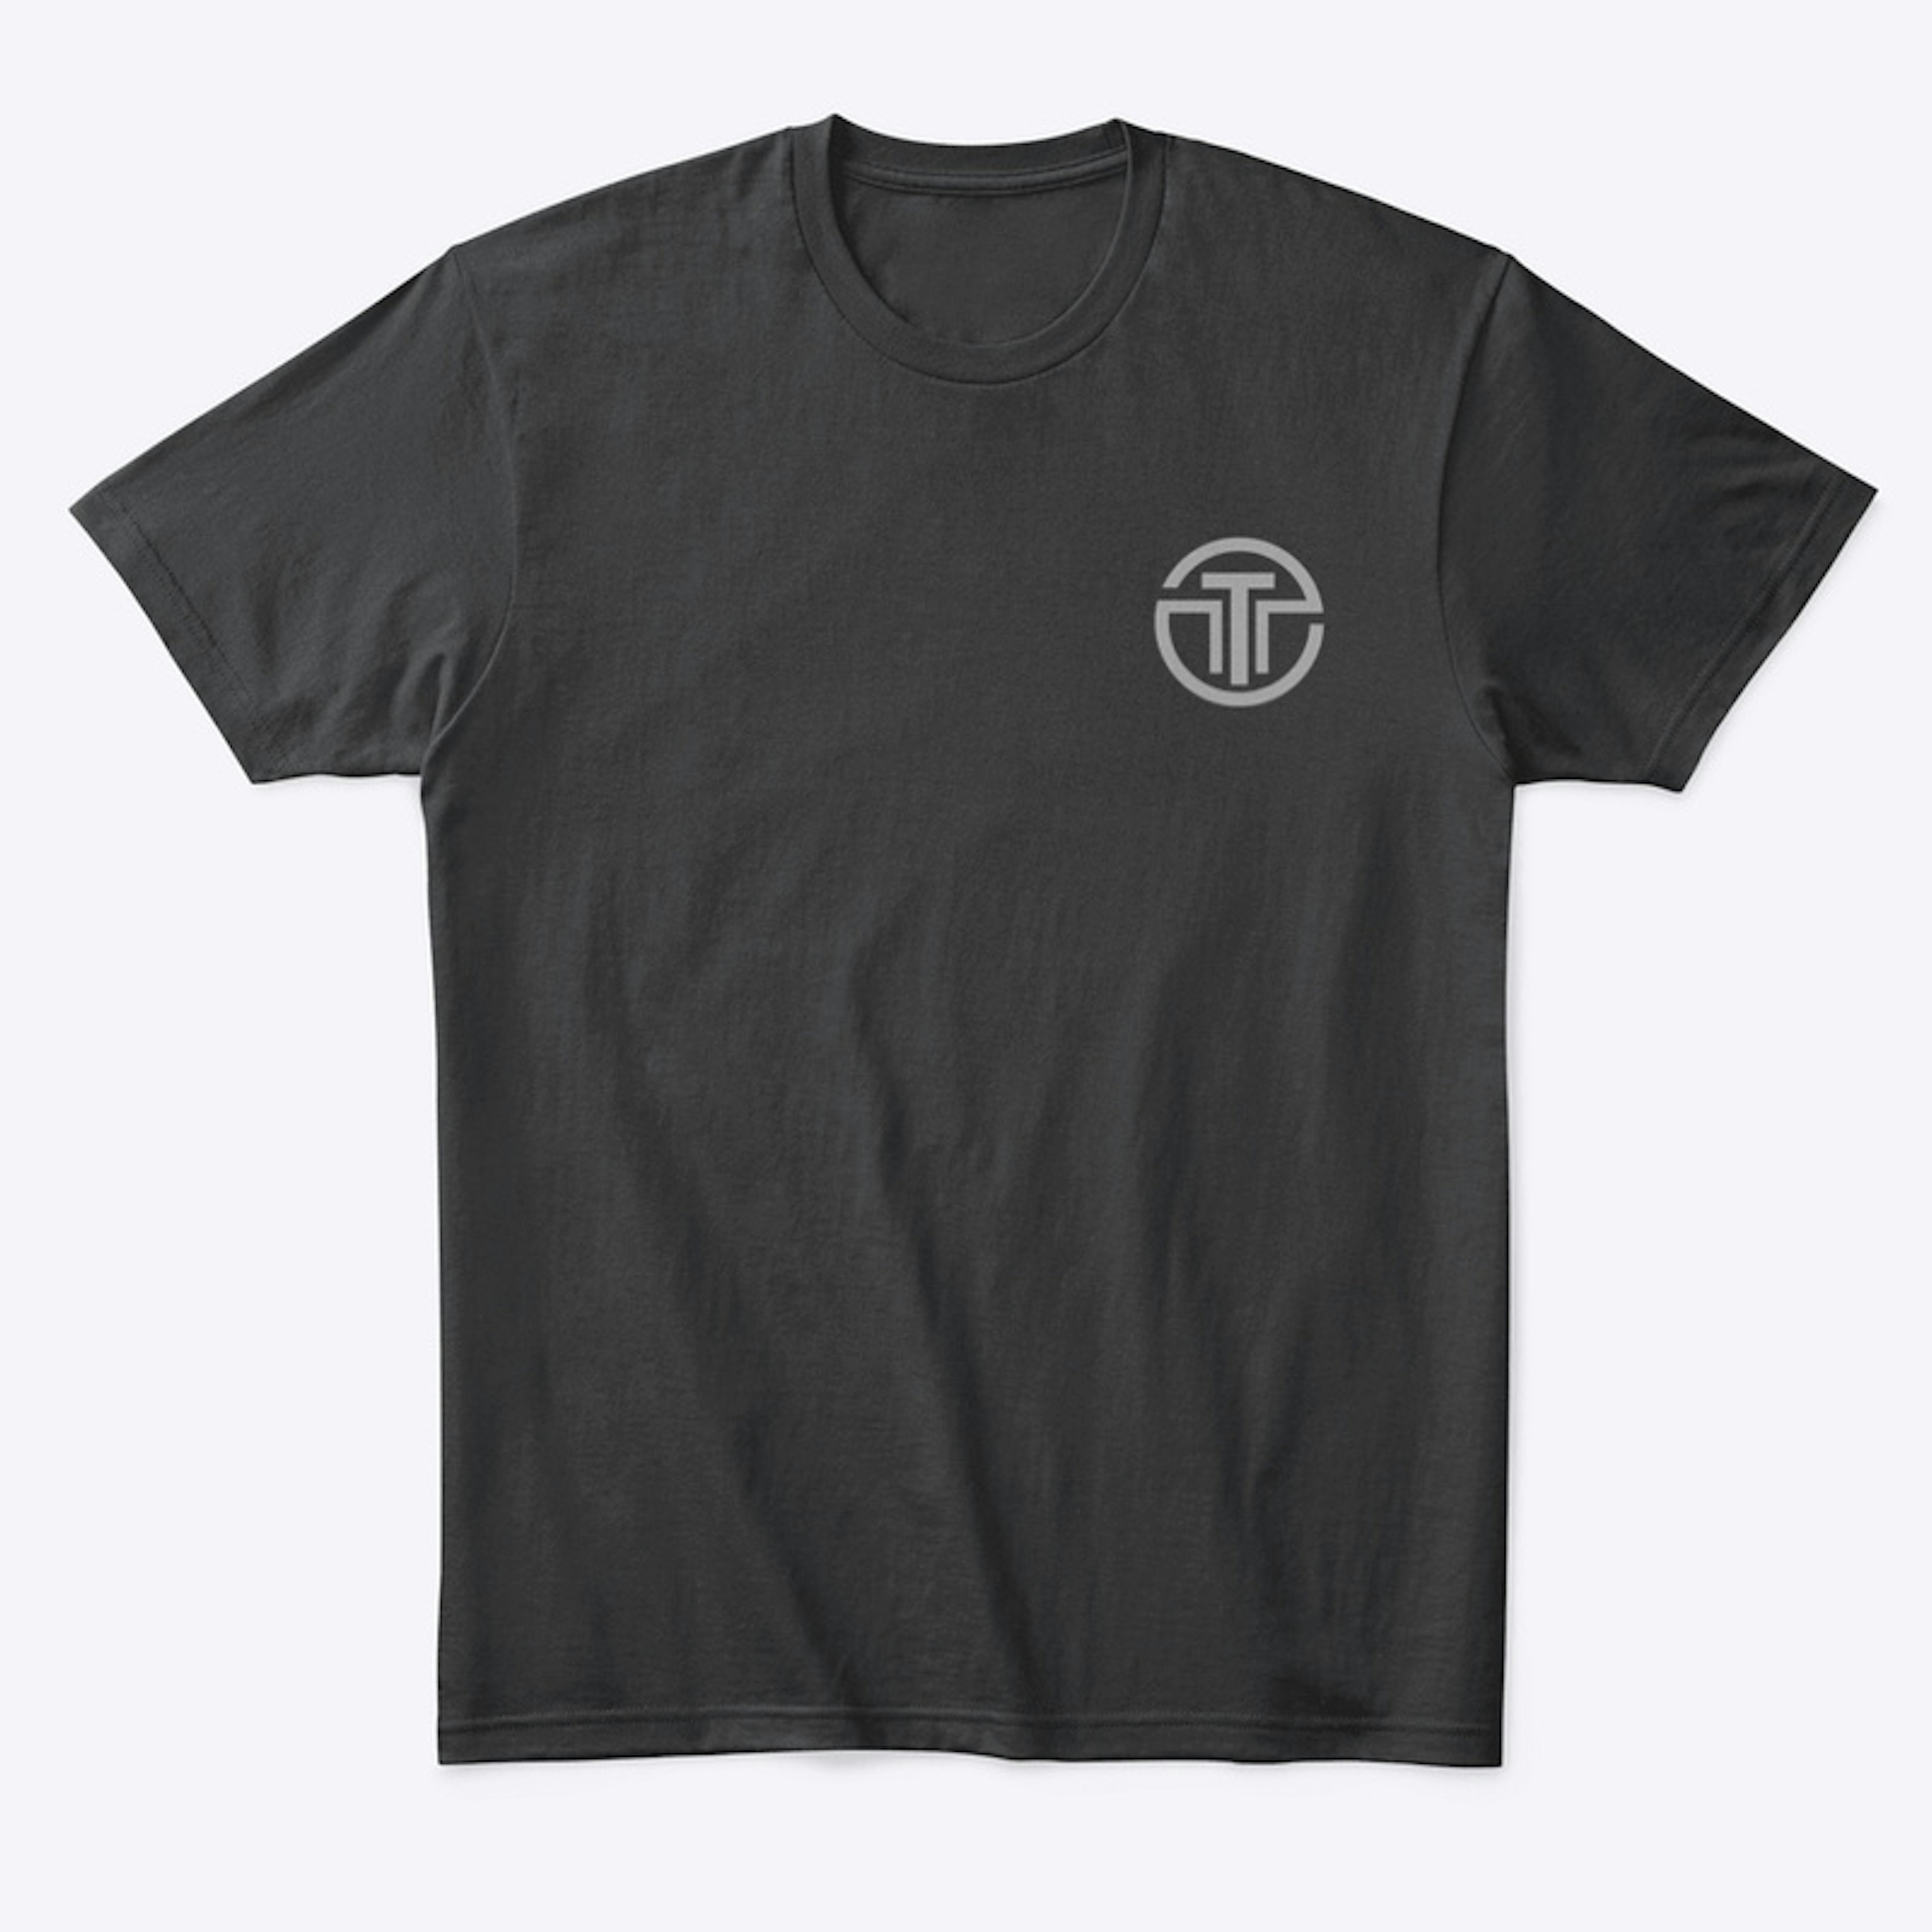 Adult Relaxed Tee (Black or Gray)